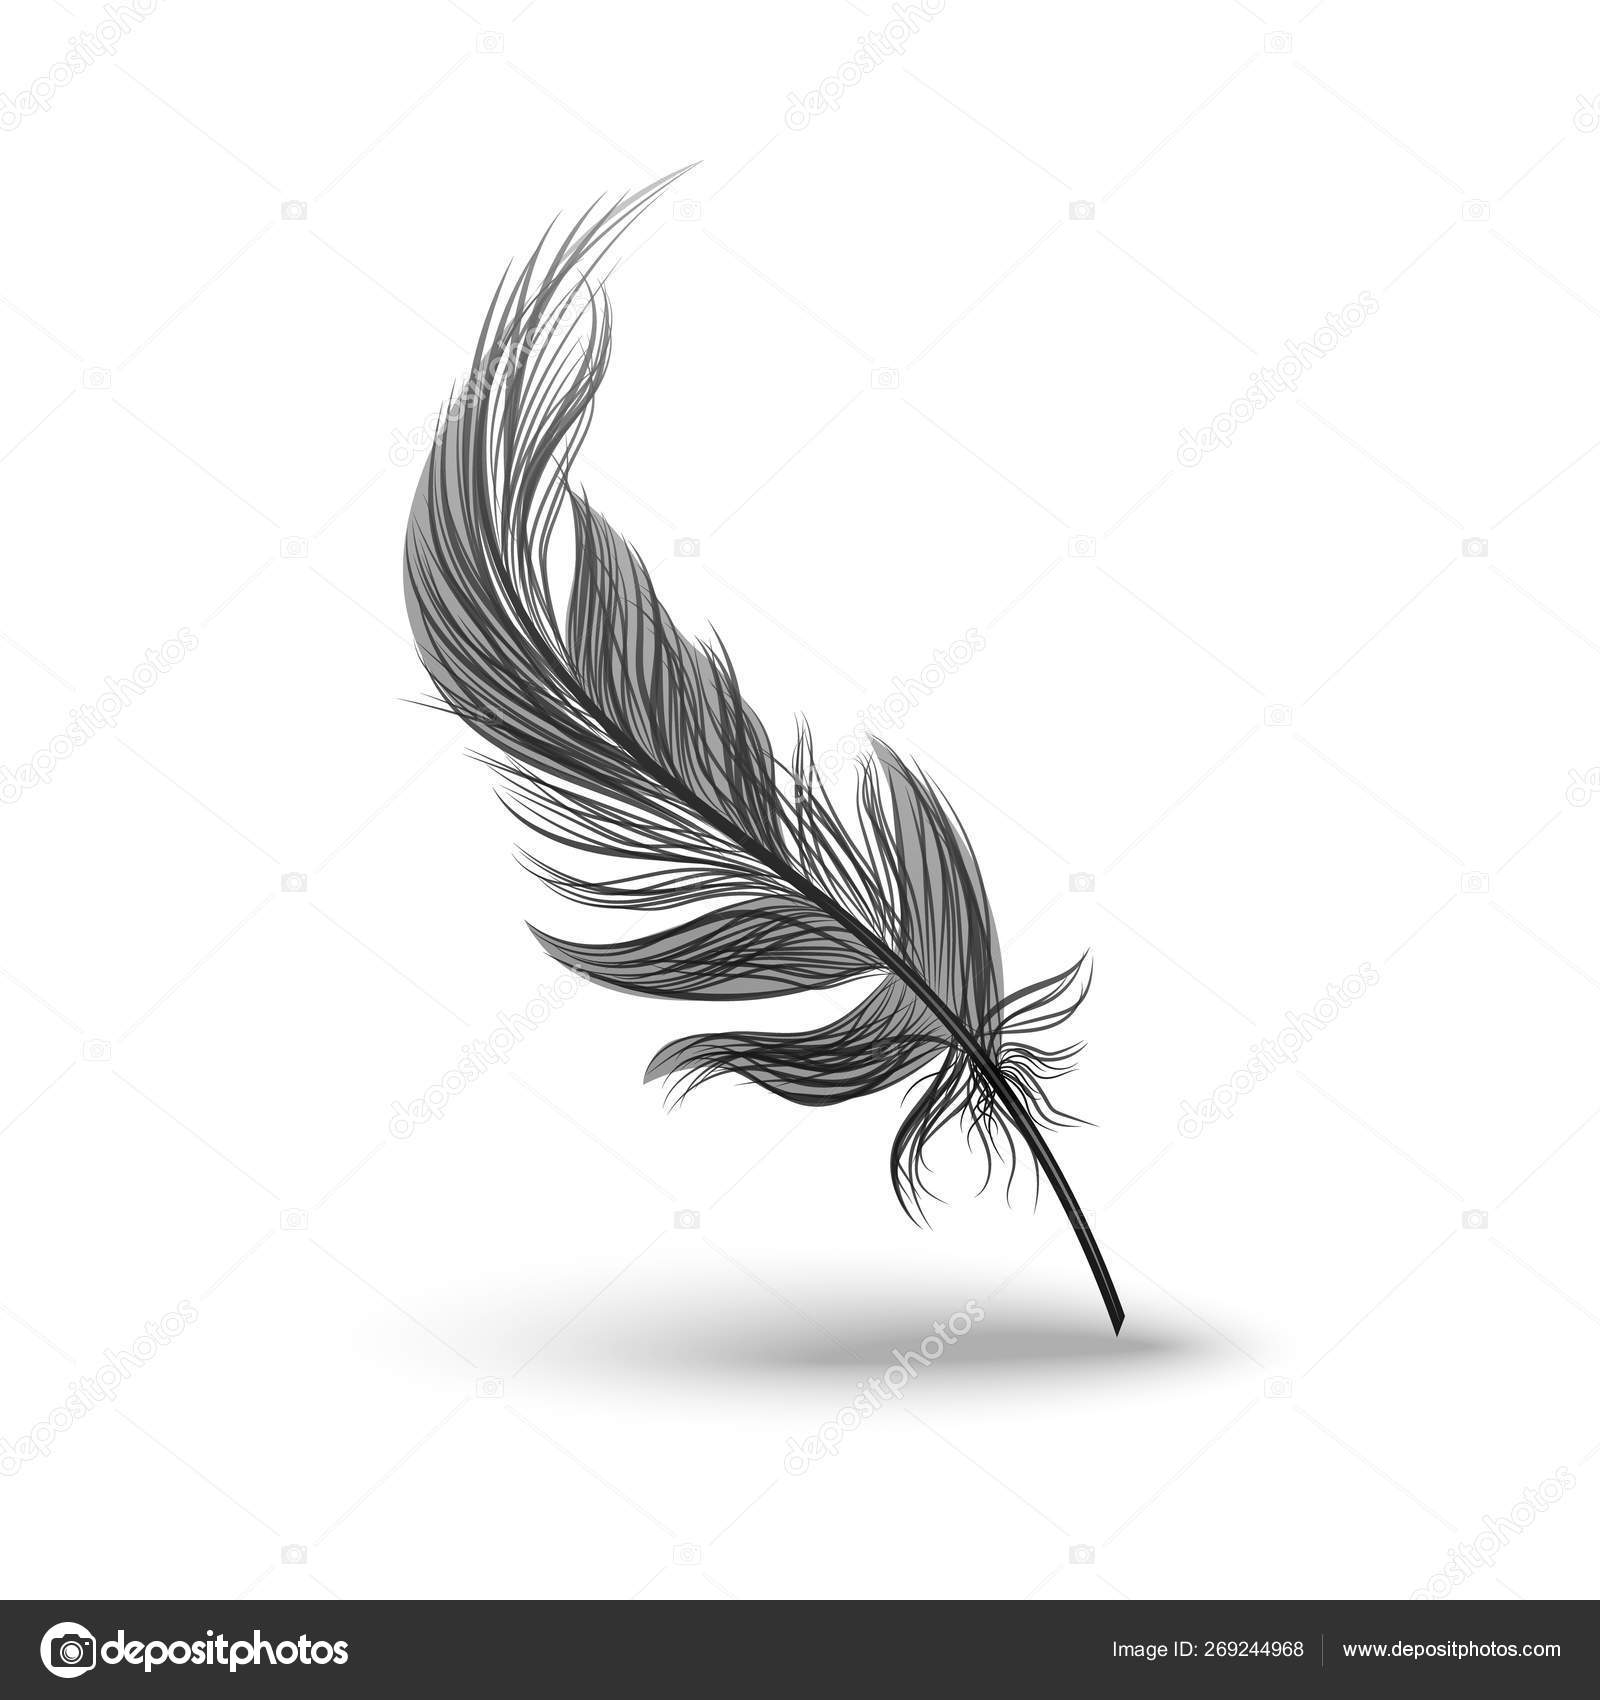 Download Black falling fluffy feather vector illustration isolated ...